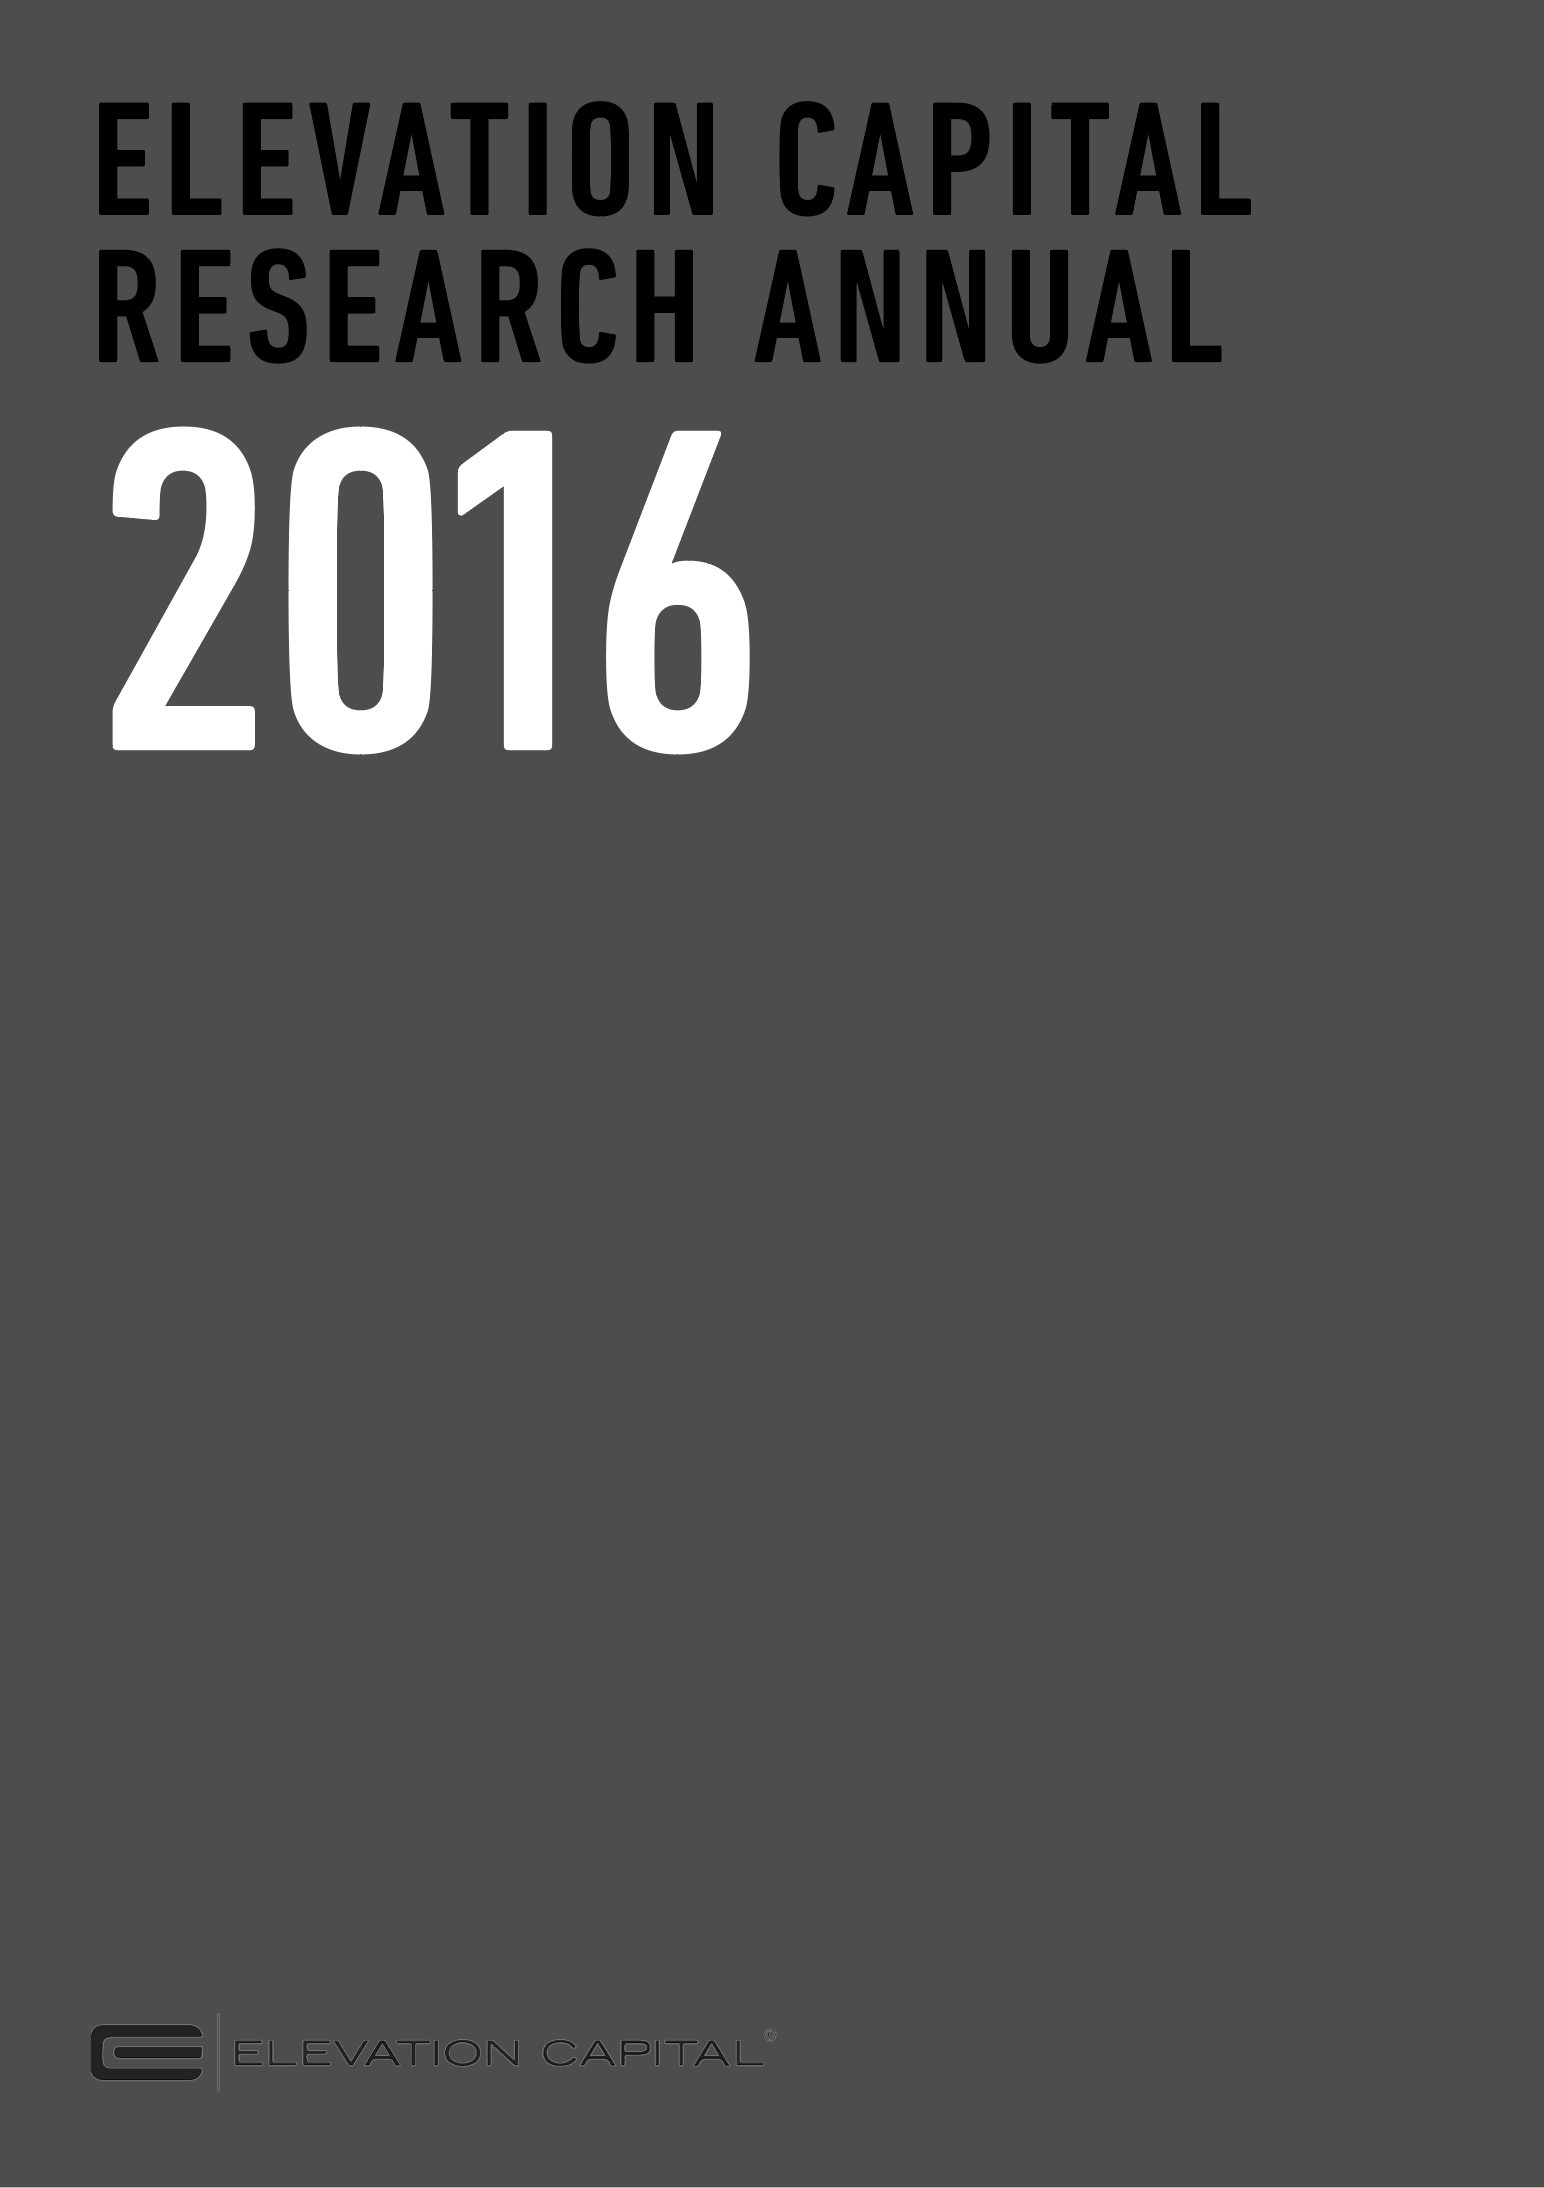 Research Annual 2016